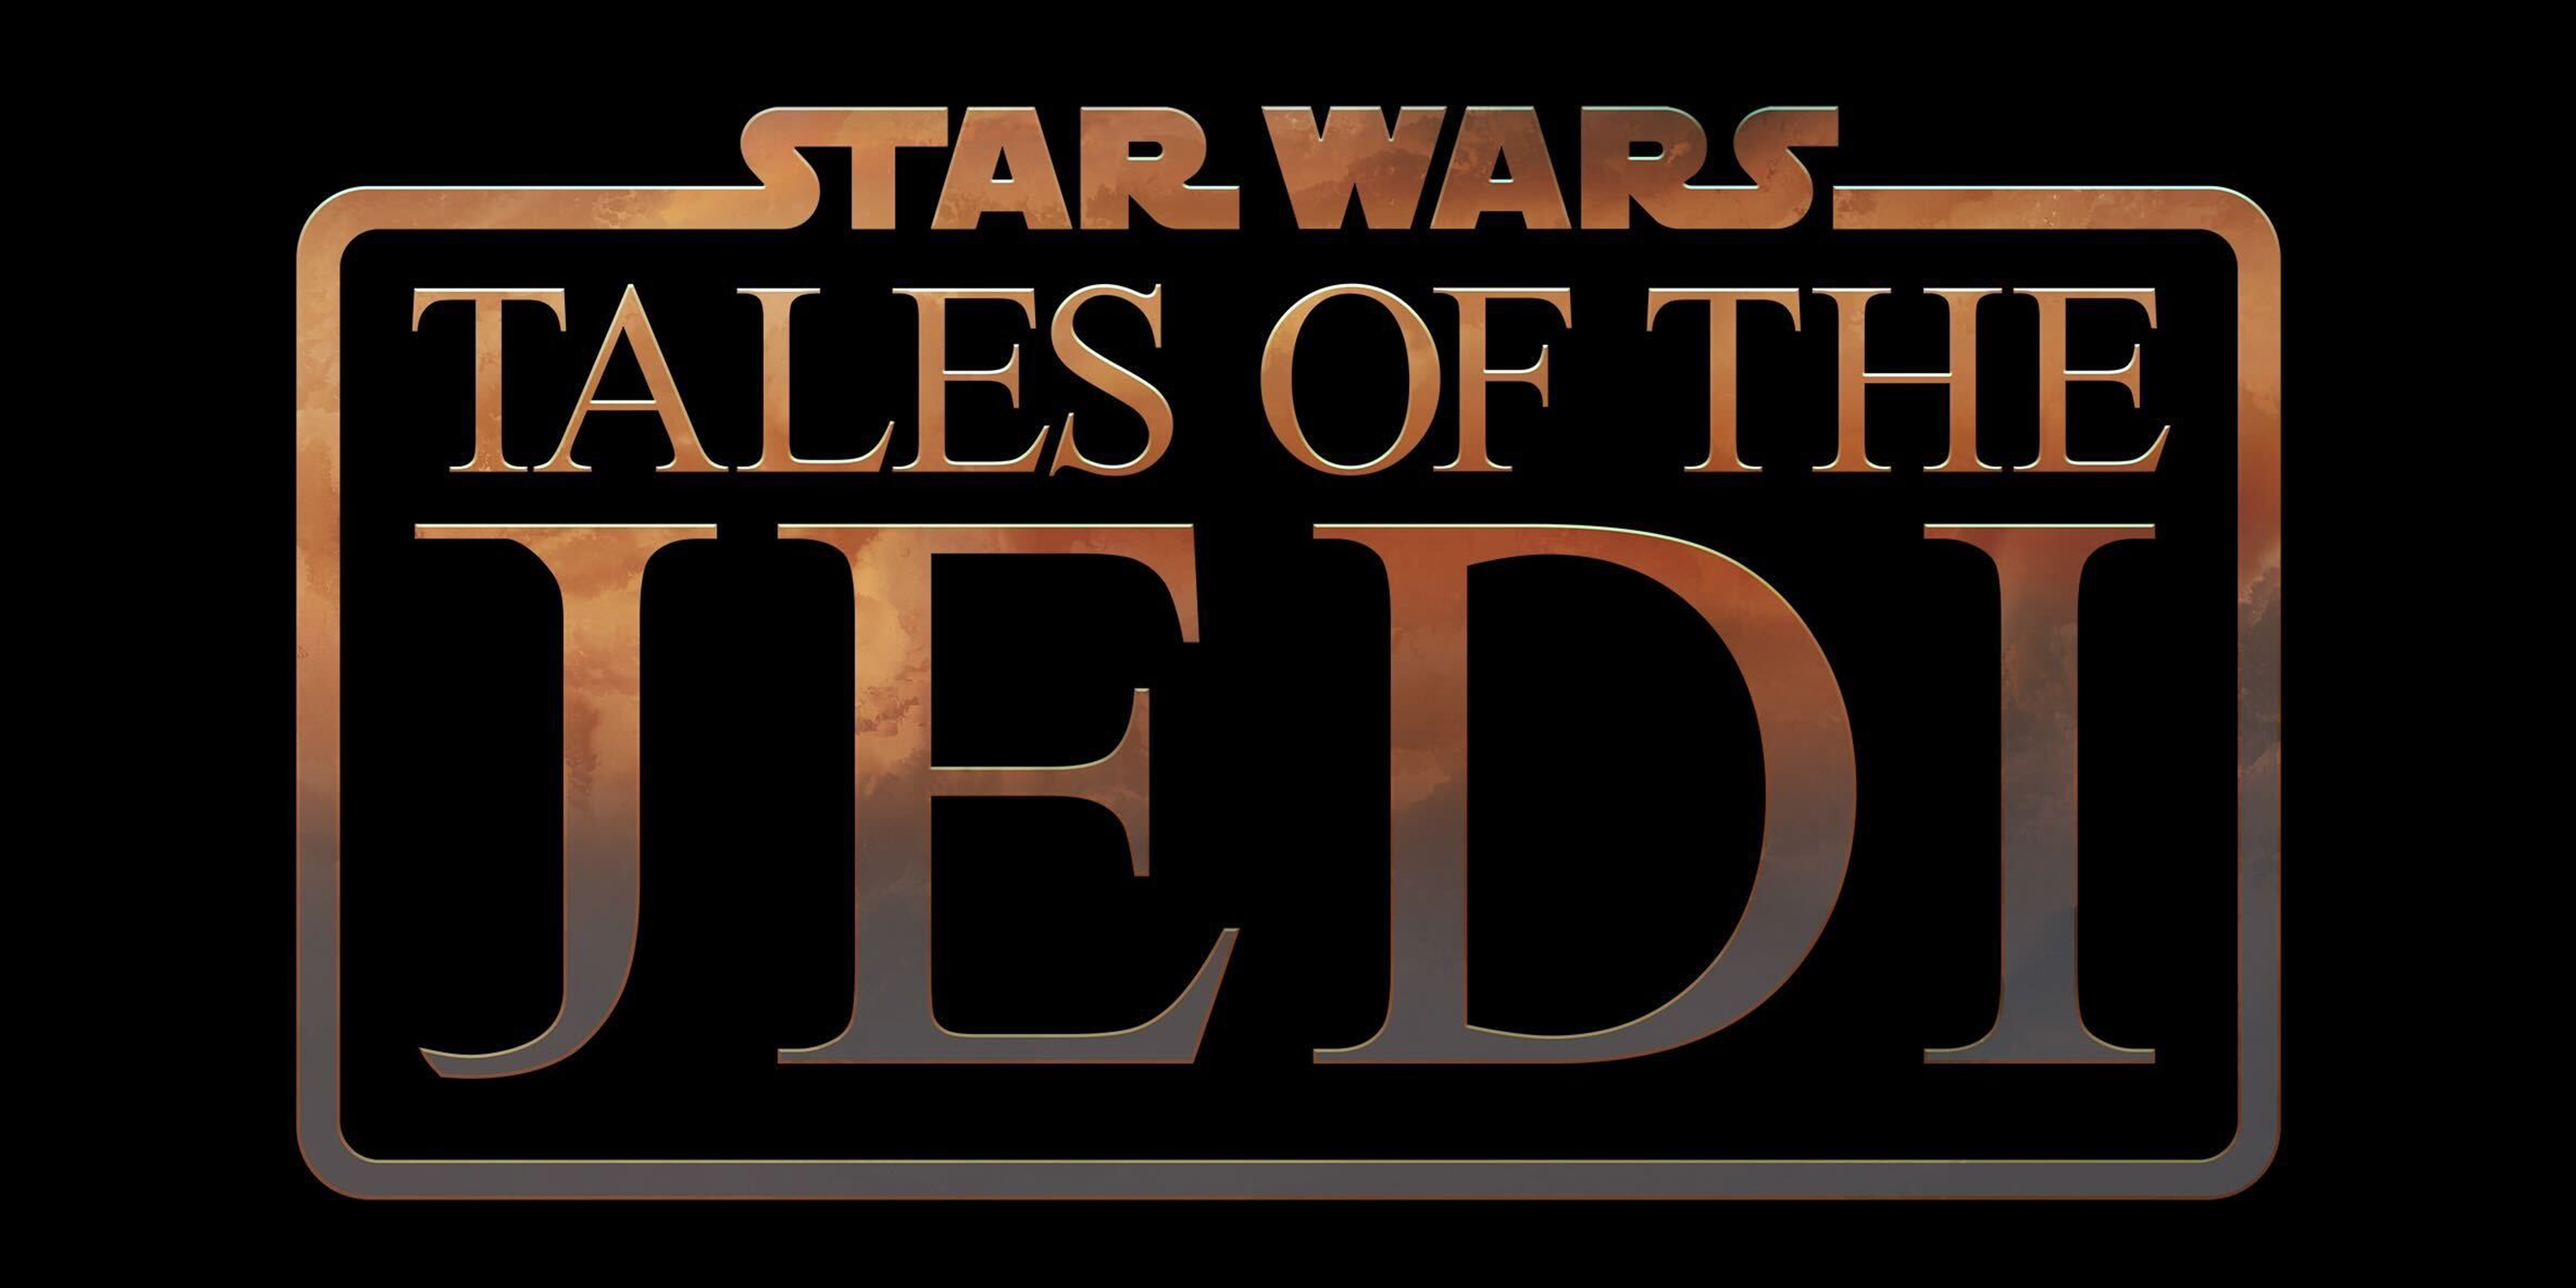 ‘Tales of the Jedi’ Is A Brief And Fascinating Look Into The Origins of Beloved Star Wars Heroes & Villains – Review